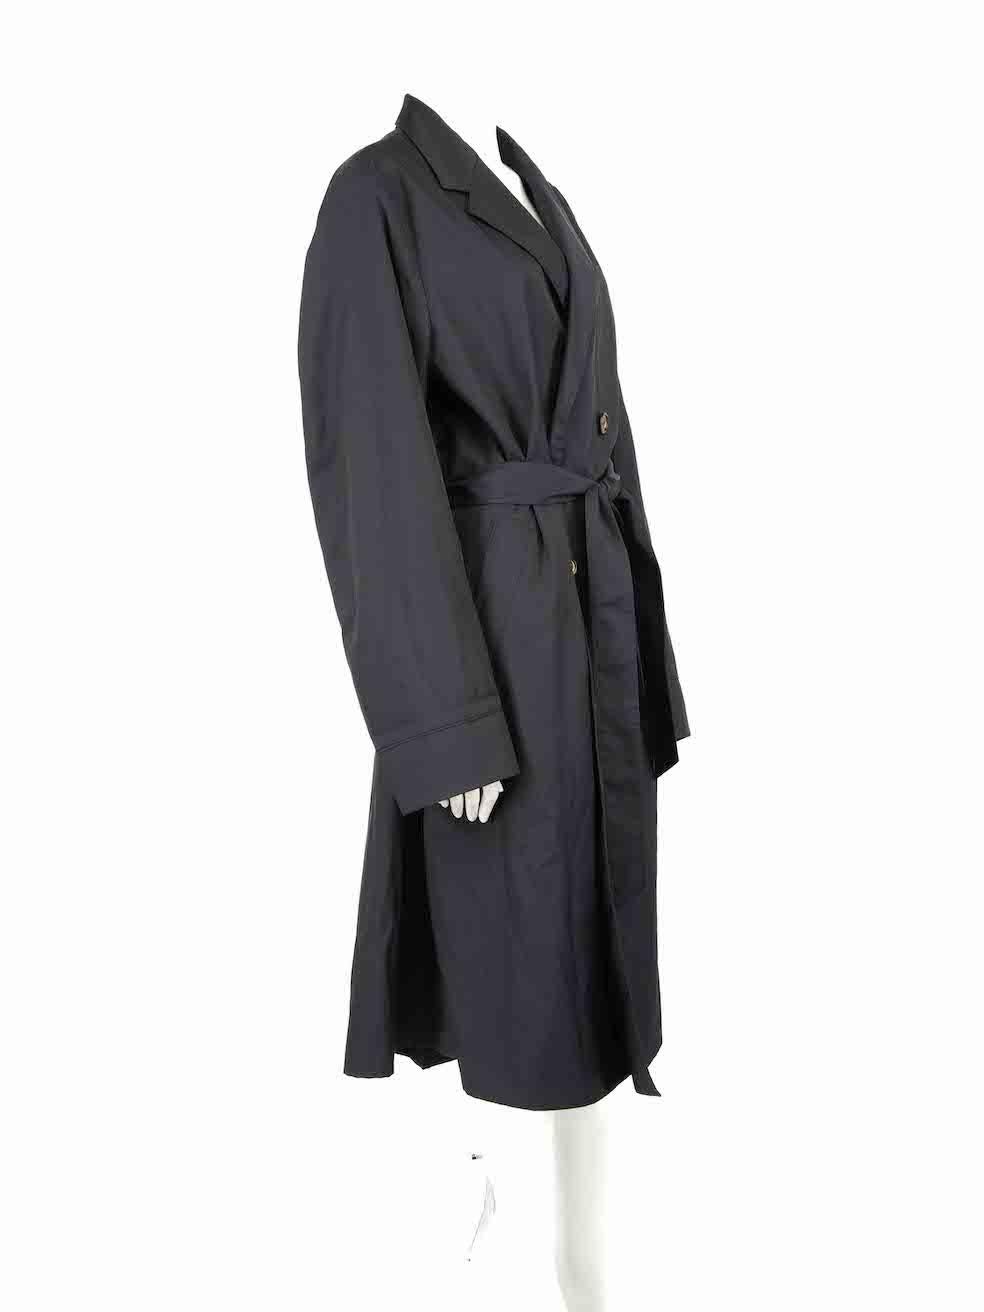 CONDITION is Very good. Minimal wear to coat is evident. Minimal wear to brand label where a sharpie mark is seen on this used Bally designer resale item.
 
Details
SS21
Black
Synthetic
Trench coat
Long sleeves
Belted
Button up fastening
Double